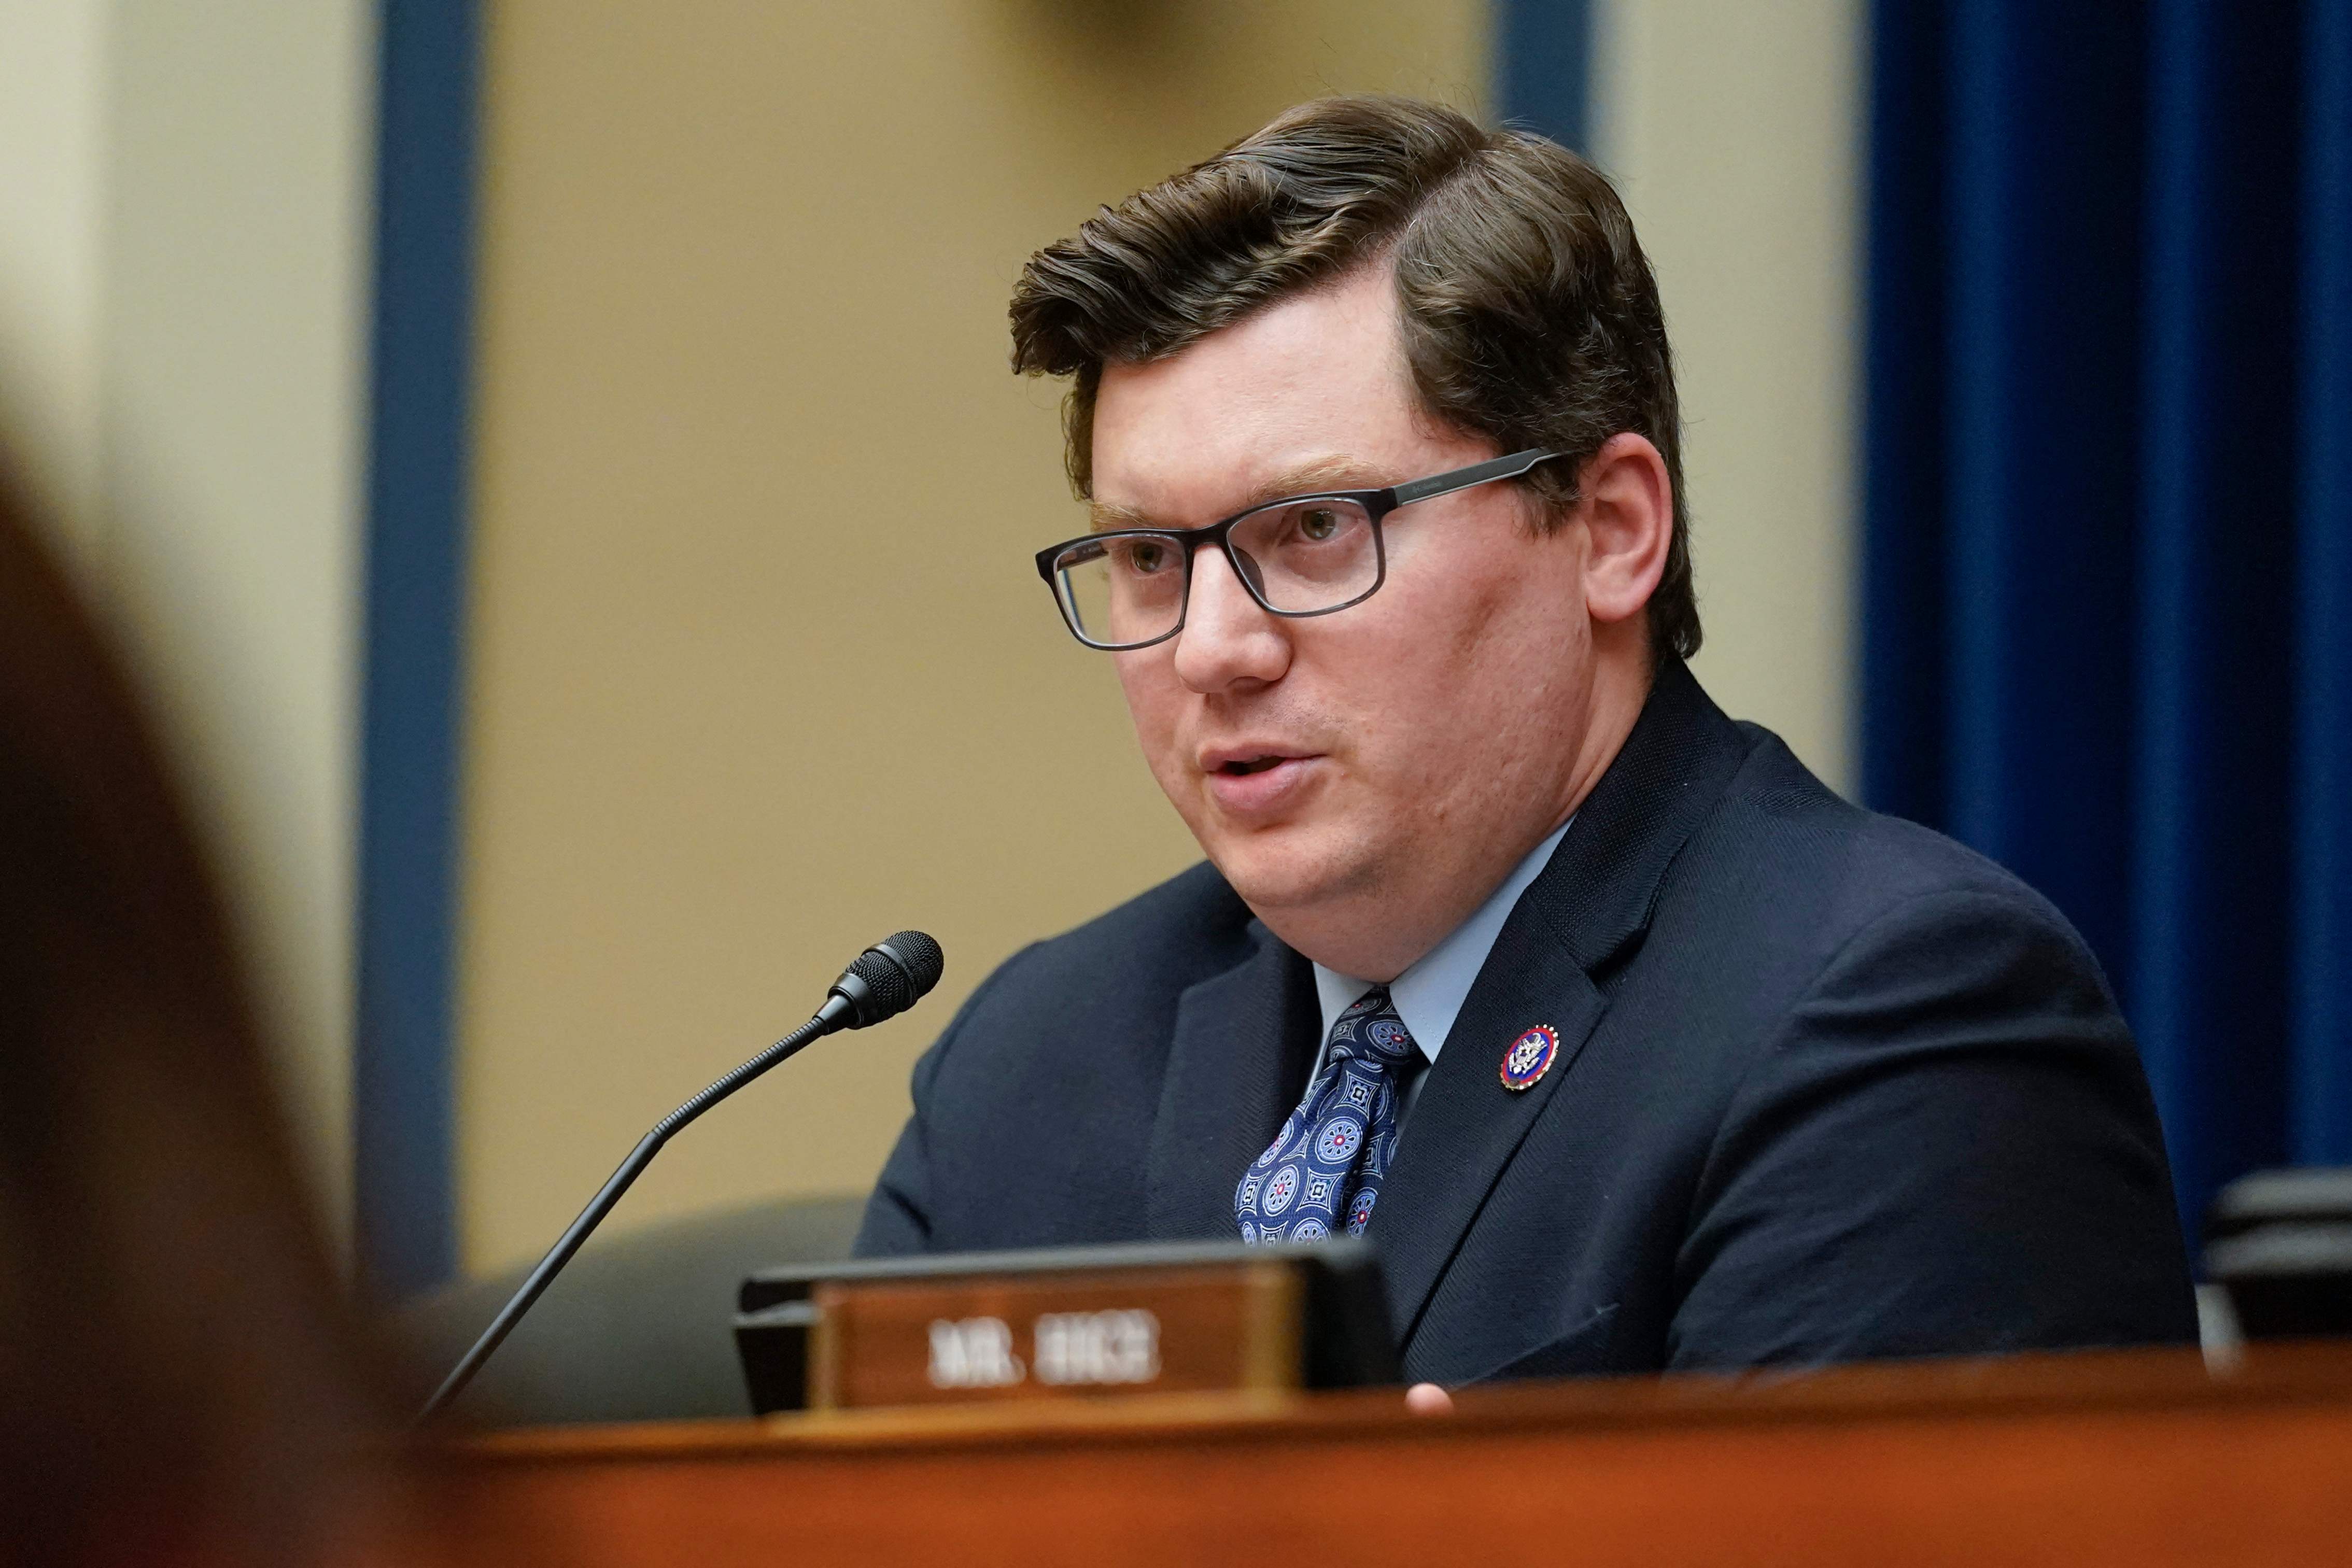 Rep. Jacob LaTurner, R-Kan., speaks during a House Committee on Oversight and Reform hearing on gun violence on Capitol Hill in Washington, DC, June 8, 2022